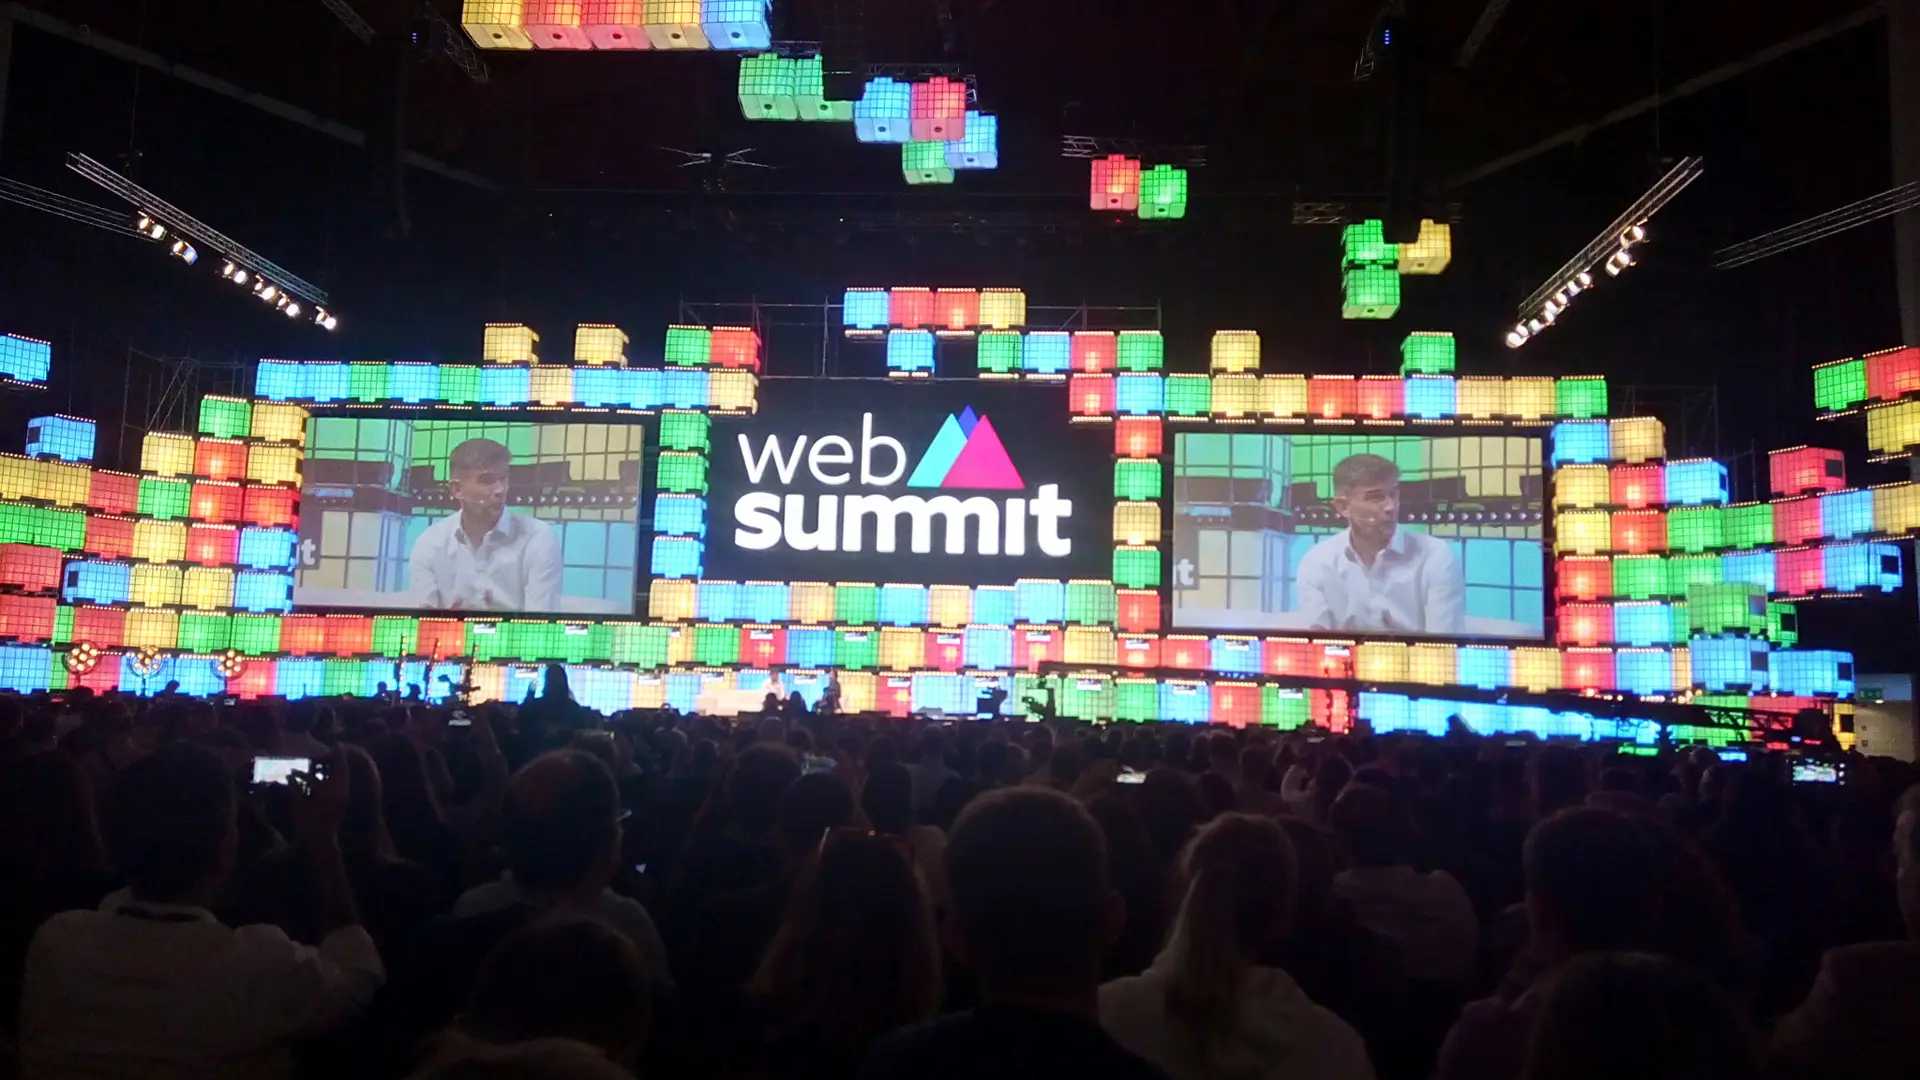 Symphony’s guide to Web Summit and Lisbon